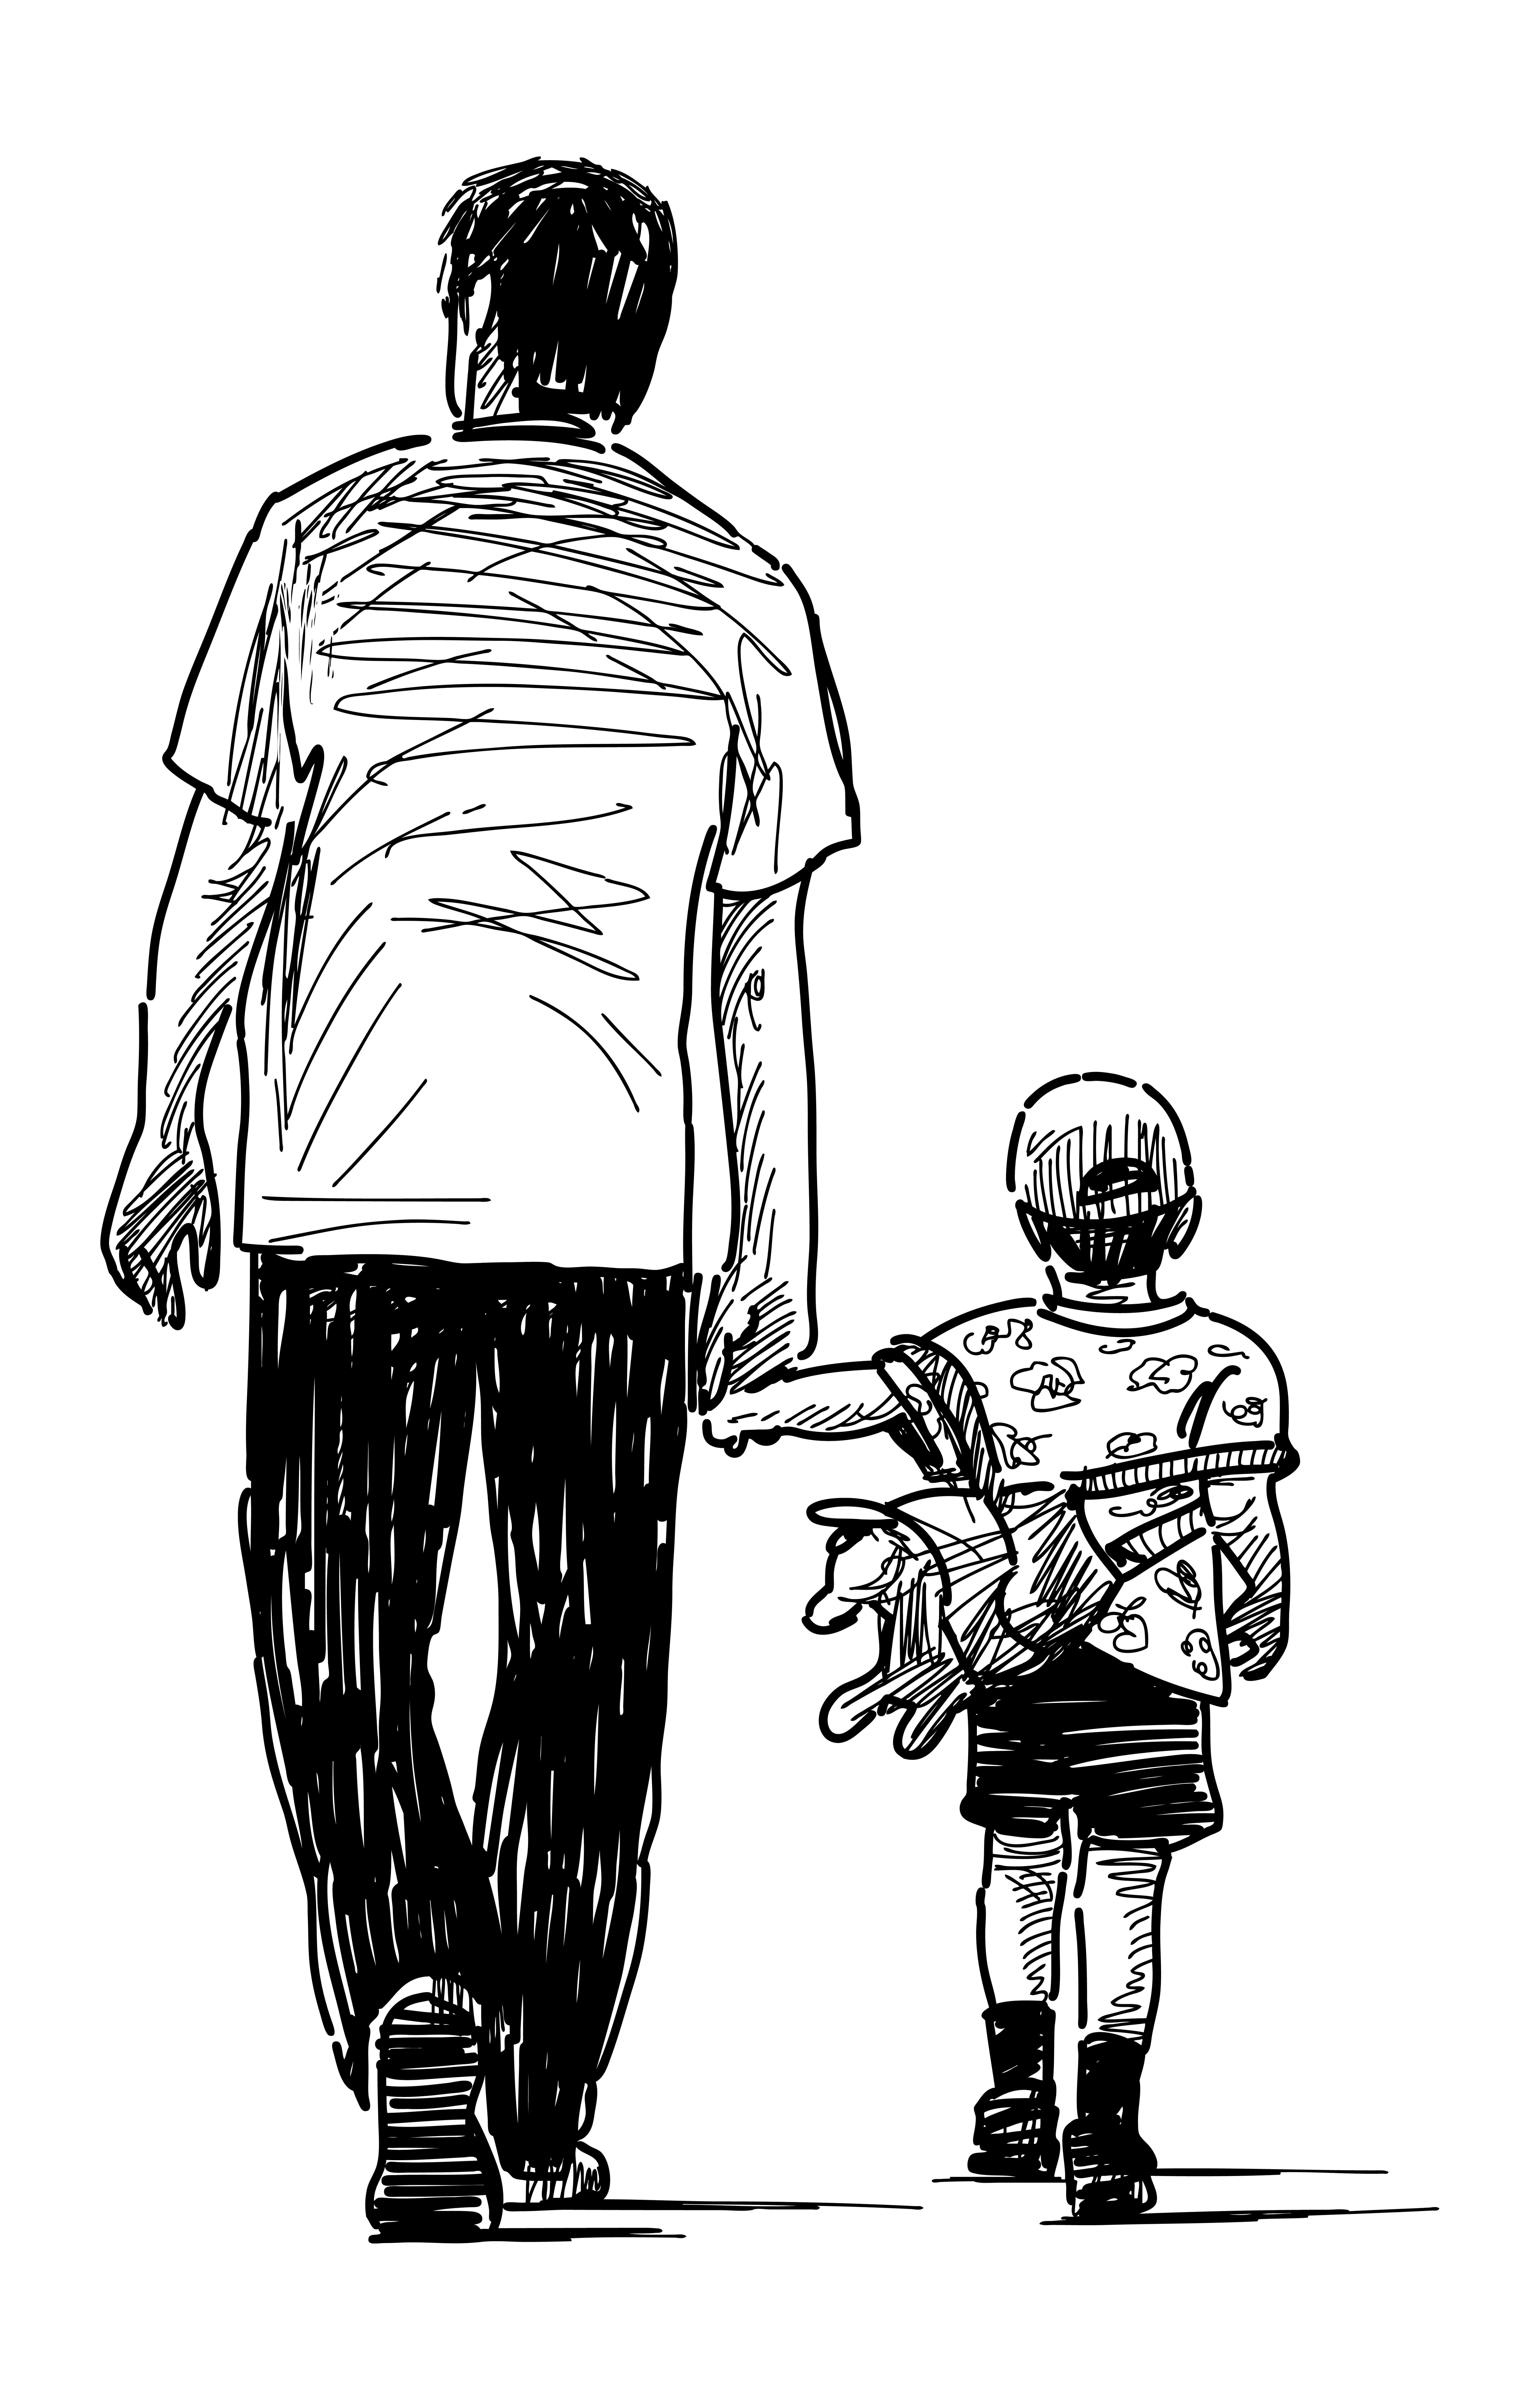 a drawing of a father and son holding hands